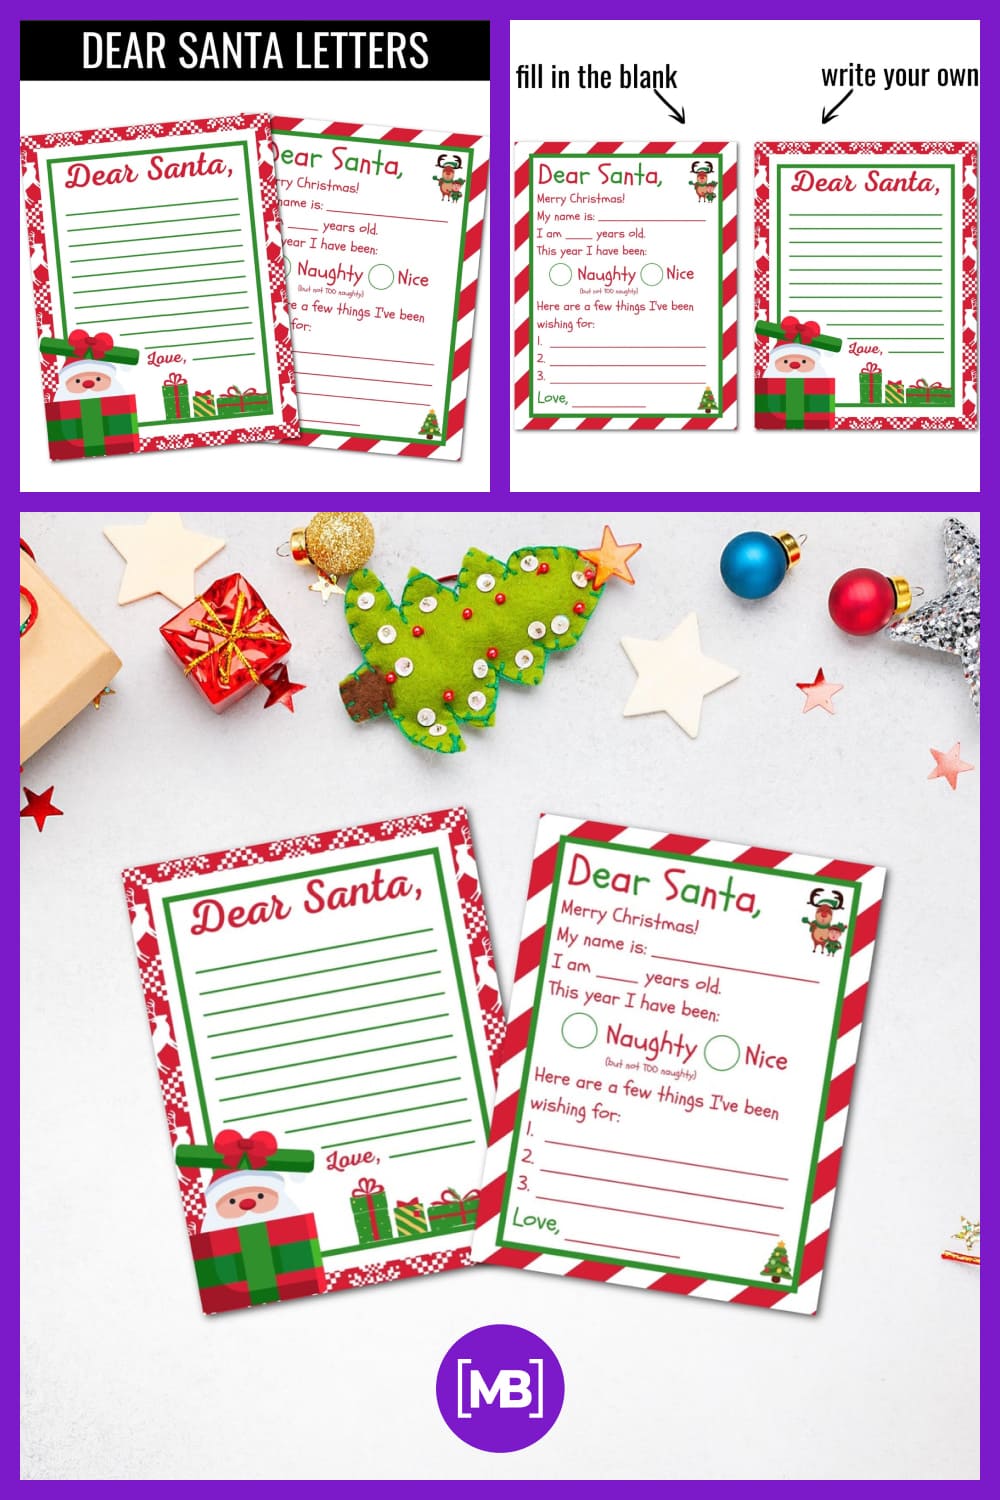 Cute letter to Santa template for your child this Christmas.